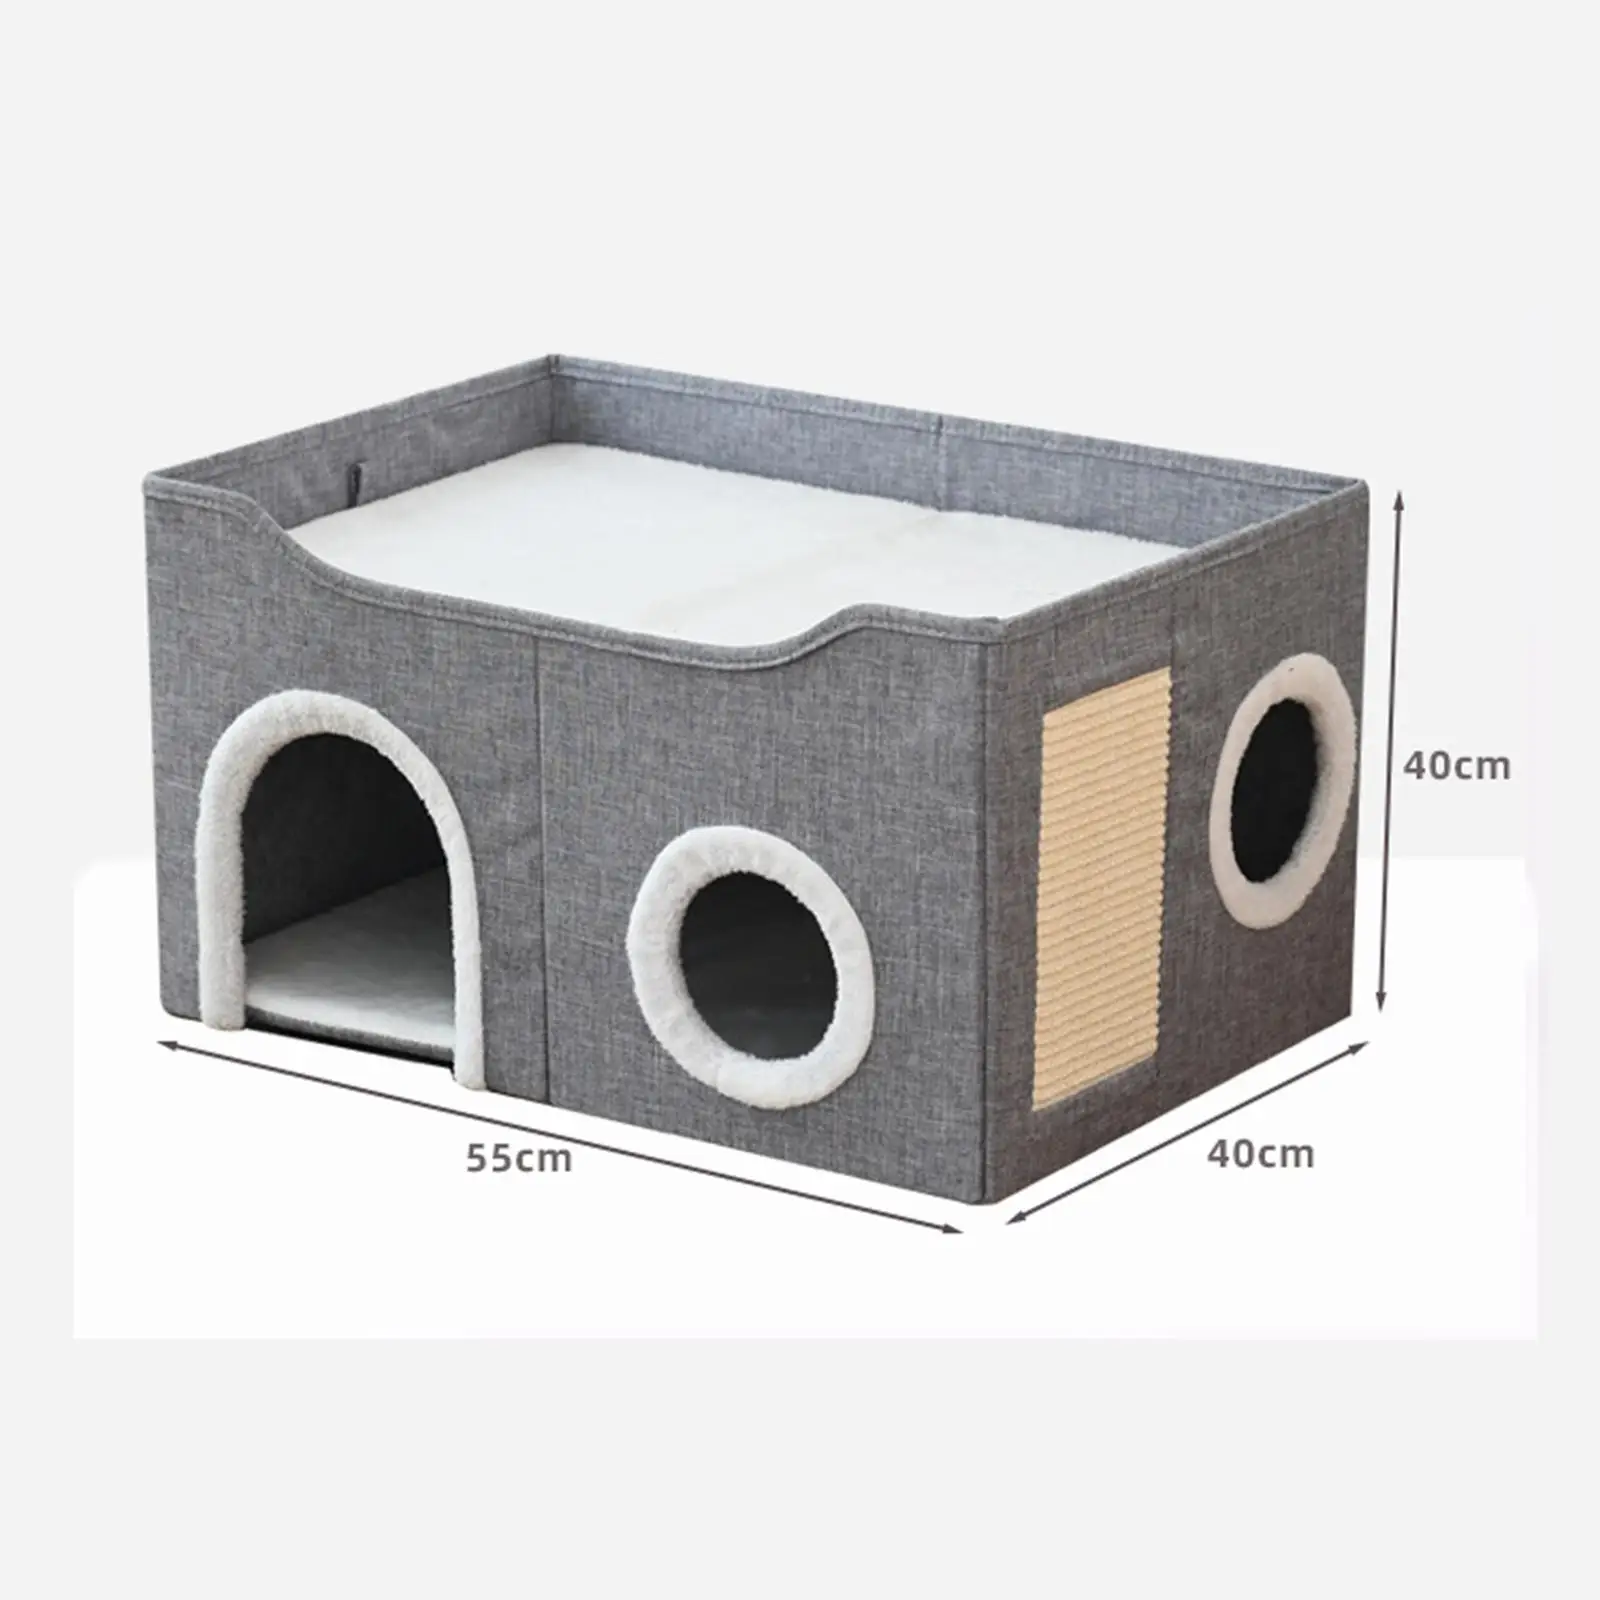 Covered Cat Bed Foldable Cat Houses & Condos Kitty Cave Bed Cat Hideaway for Cats Large Kitty Small Animals Pets New Years Gifts